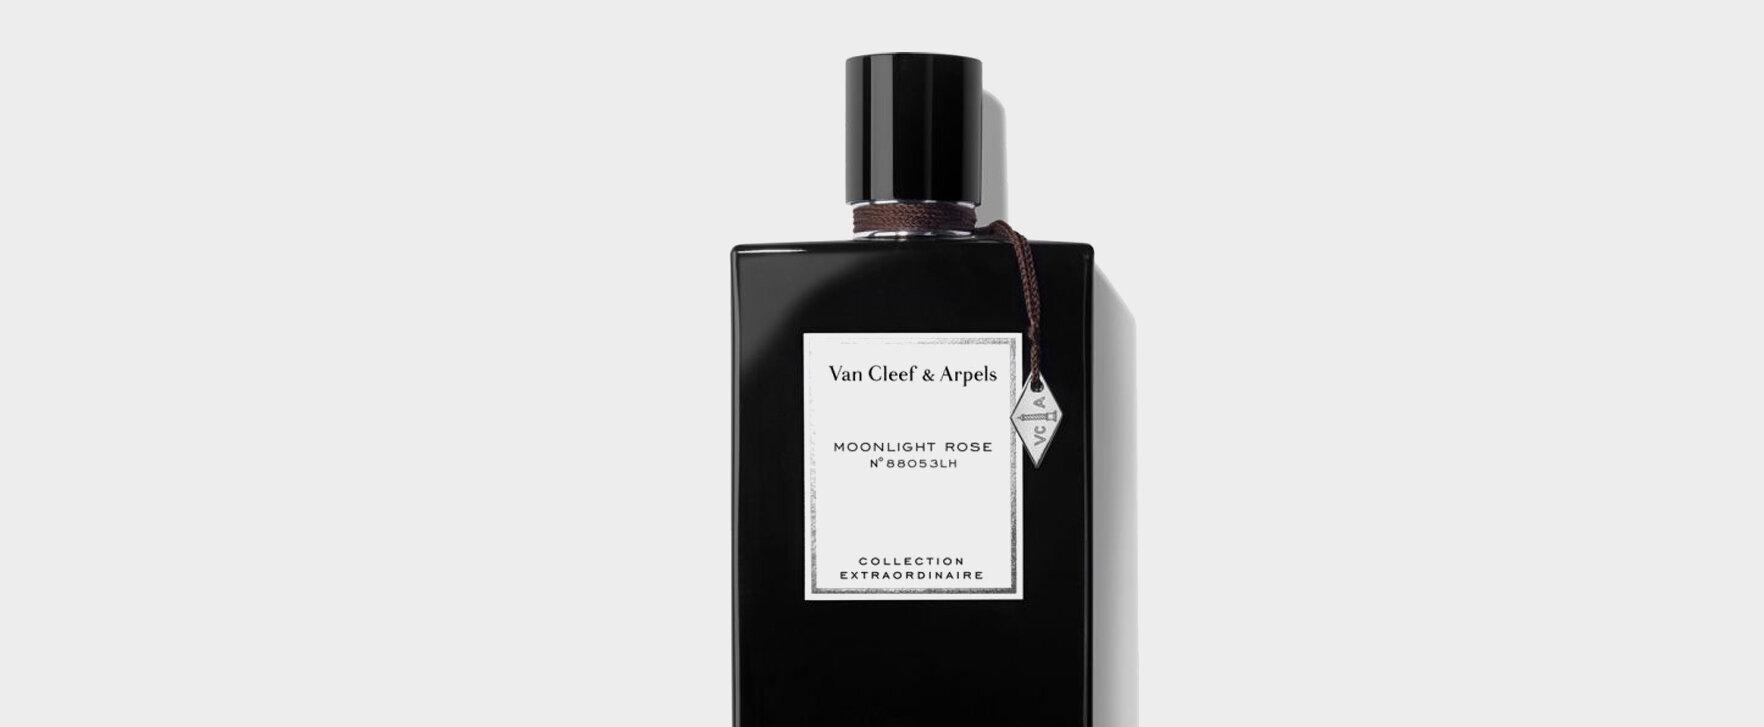 Van Cleef & Arpels Presents New Unisex Fragrance “Moonlight Rose” From the “Collection Extraordinaire"